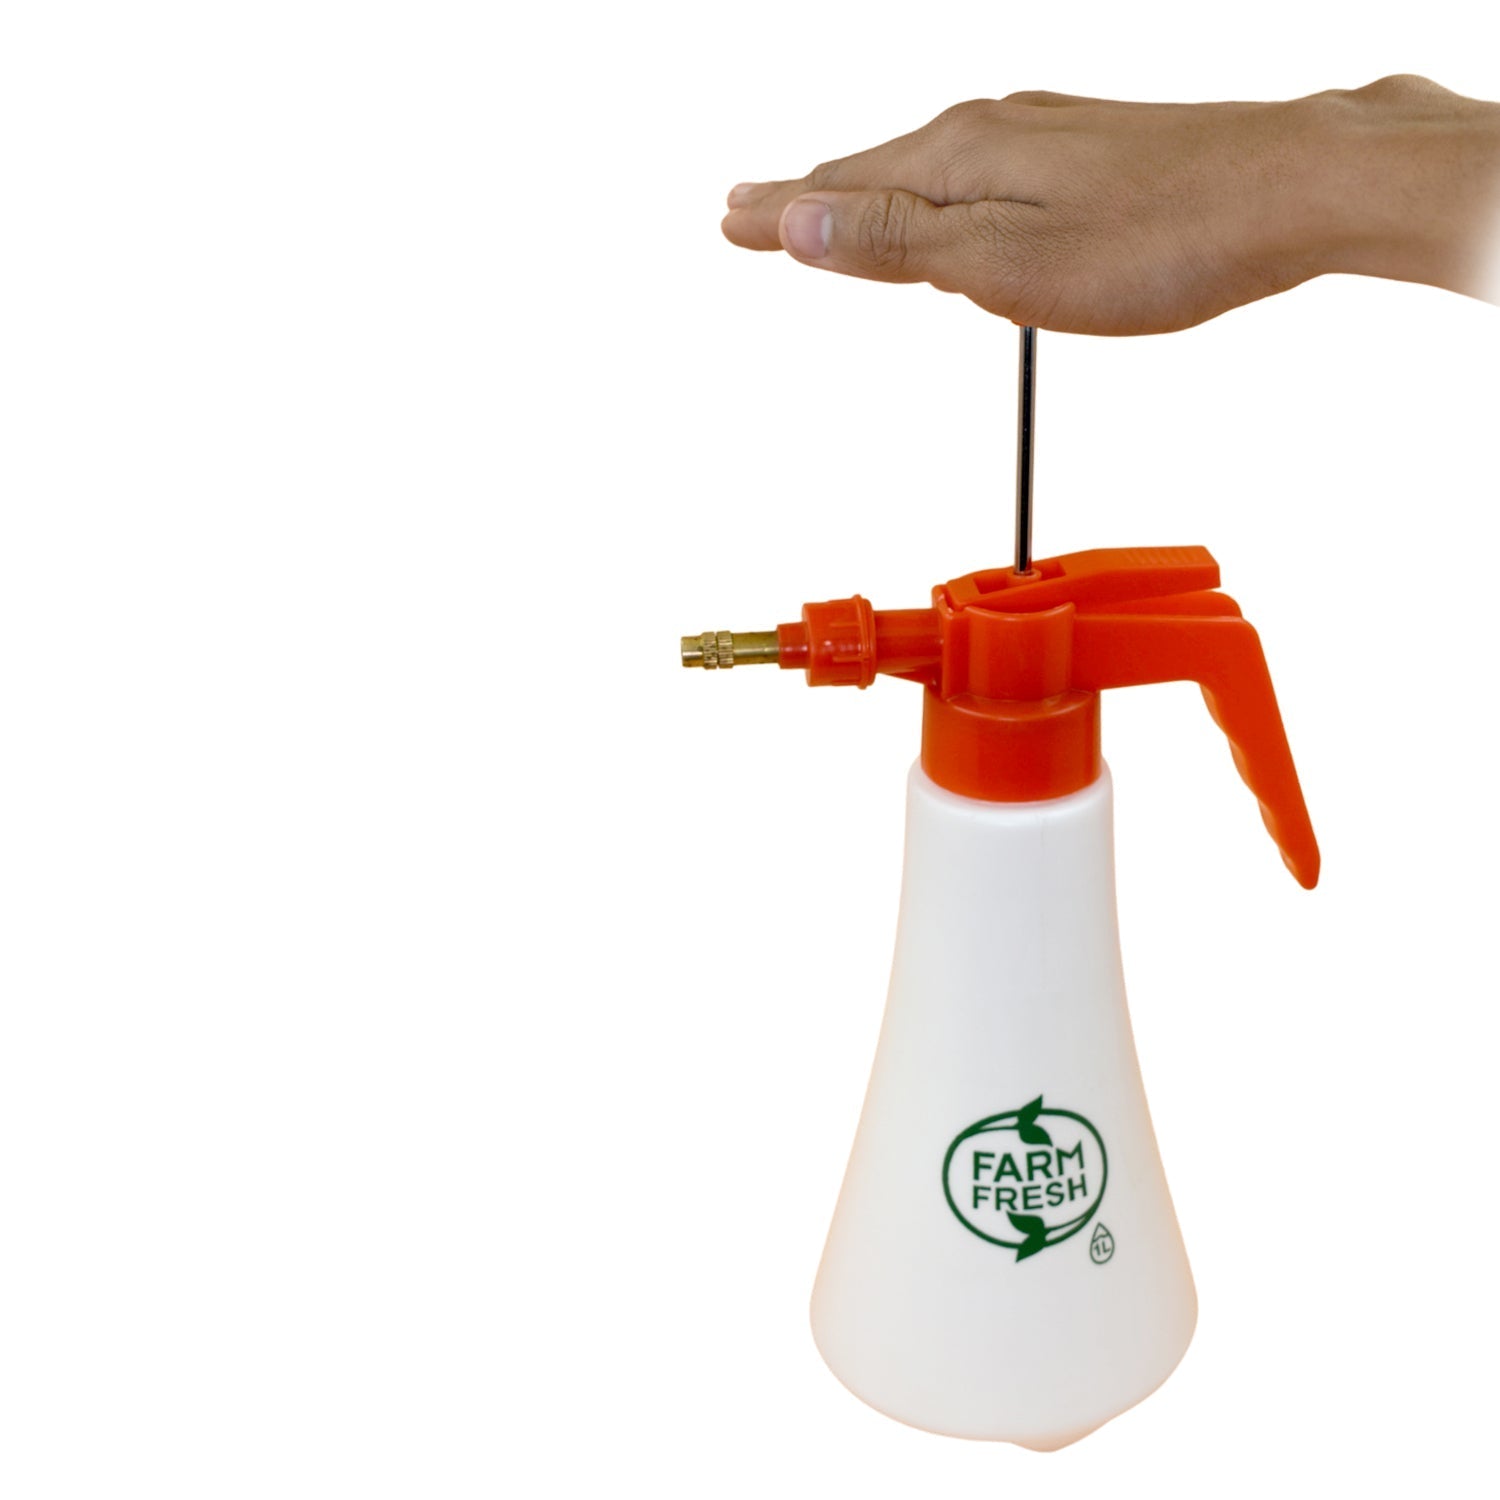 9023 1 litre Garden Sprayer used in all kinds of garden and park for sprinkling and showering purposes.